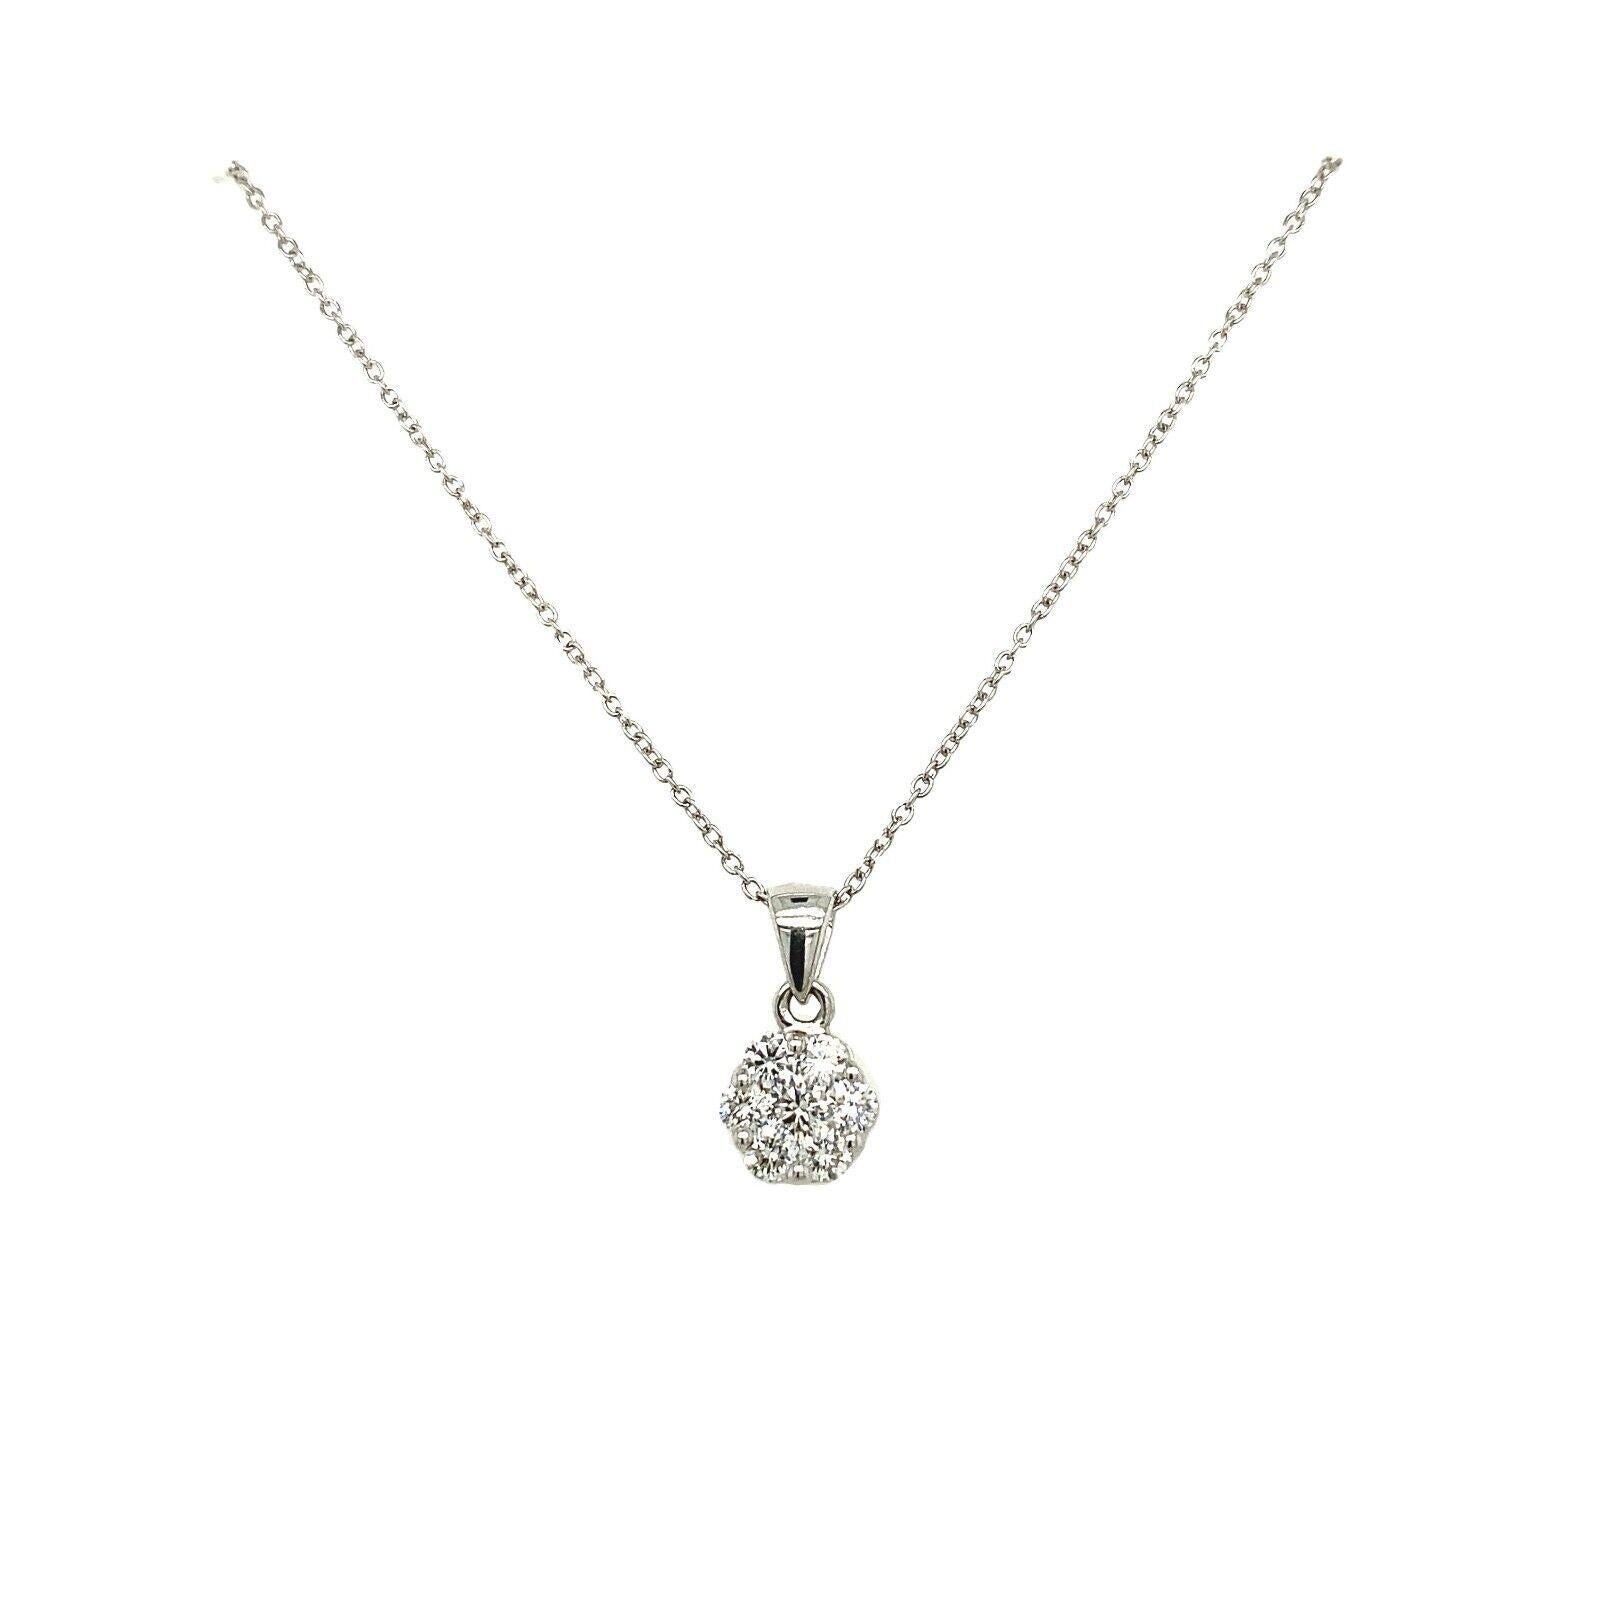 Dazzling and charming, this gorgeous Diamond pendant is set with 0.25ct F/VS cluster of round Diamonds in Platinum, The pendant is suspended from a Platinum chain that measures 16 inches.

Additional Information:
Item Length: 16